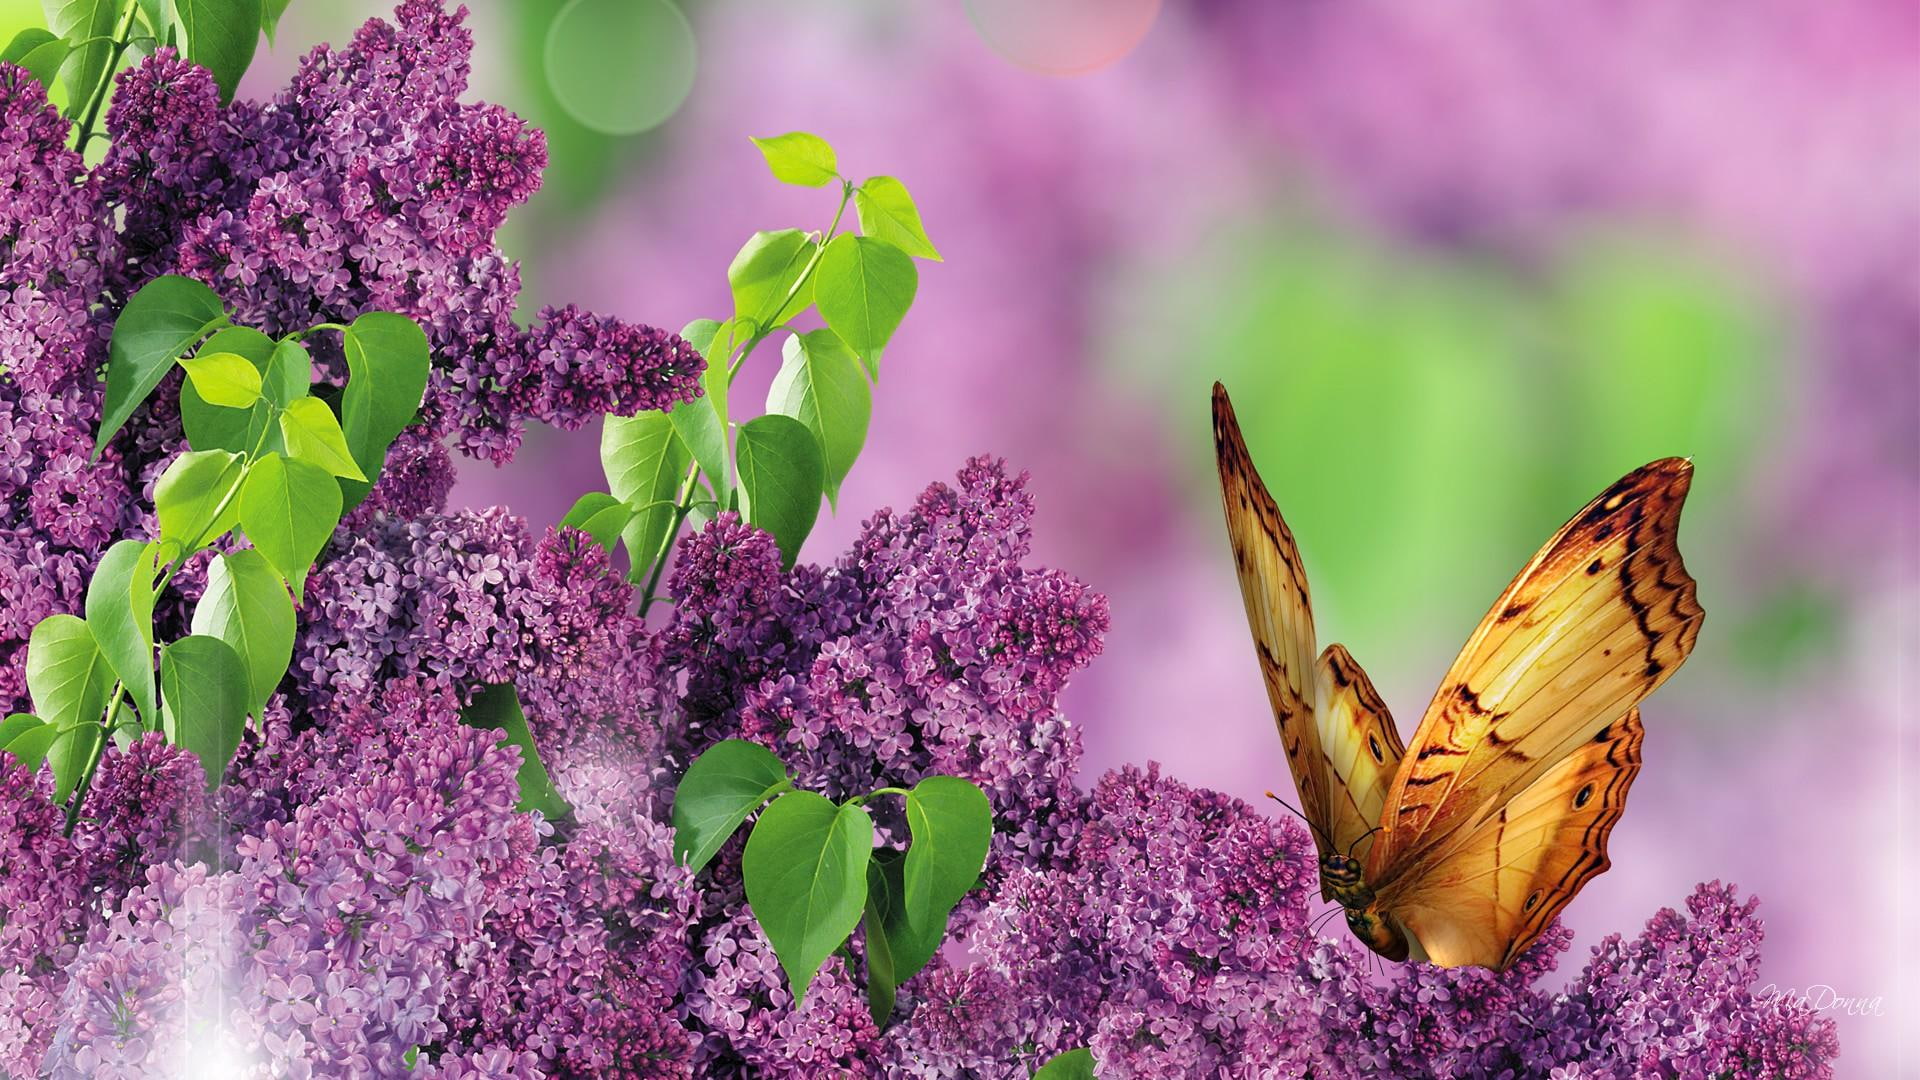 In Spring Garden, perfume, soft, fragrant, lilacs, lavender, butterfly